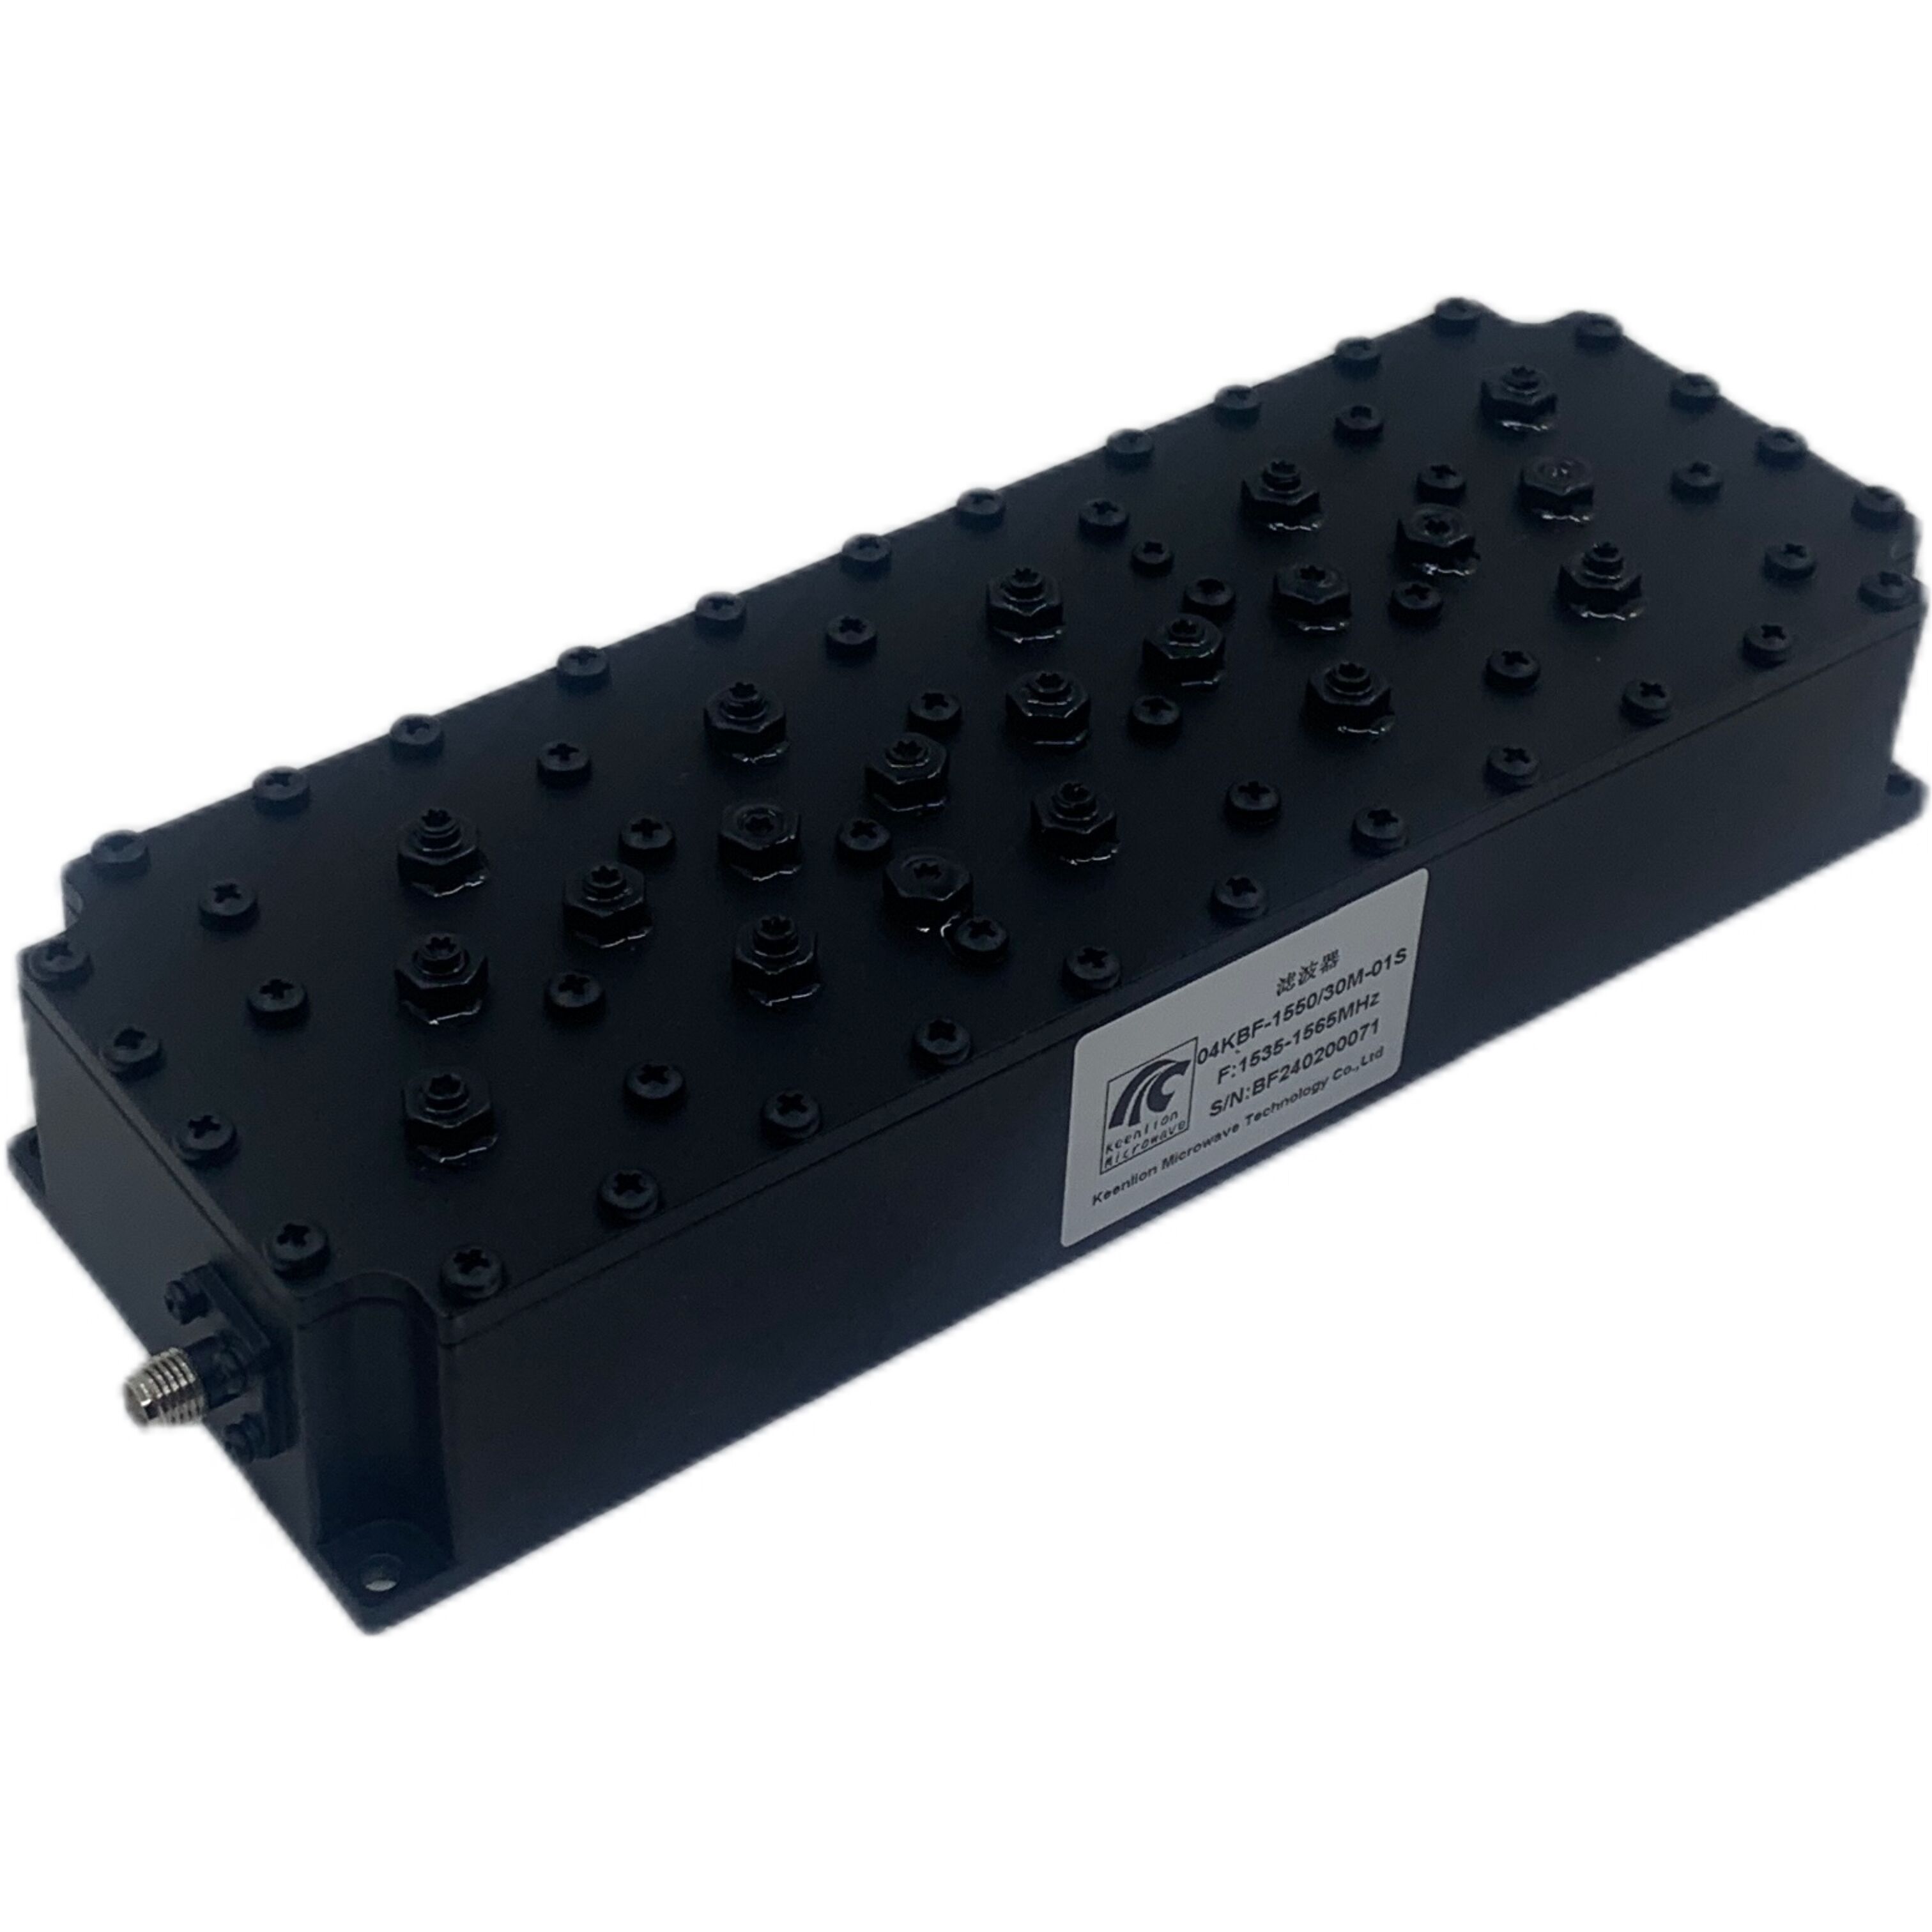 Keenlion Launches New 1535-1565MHz Customized RF Cavity Filters